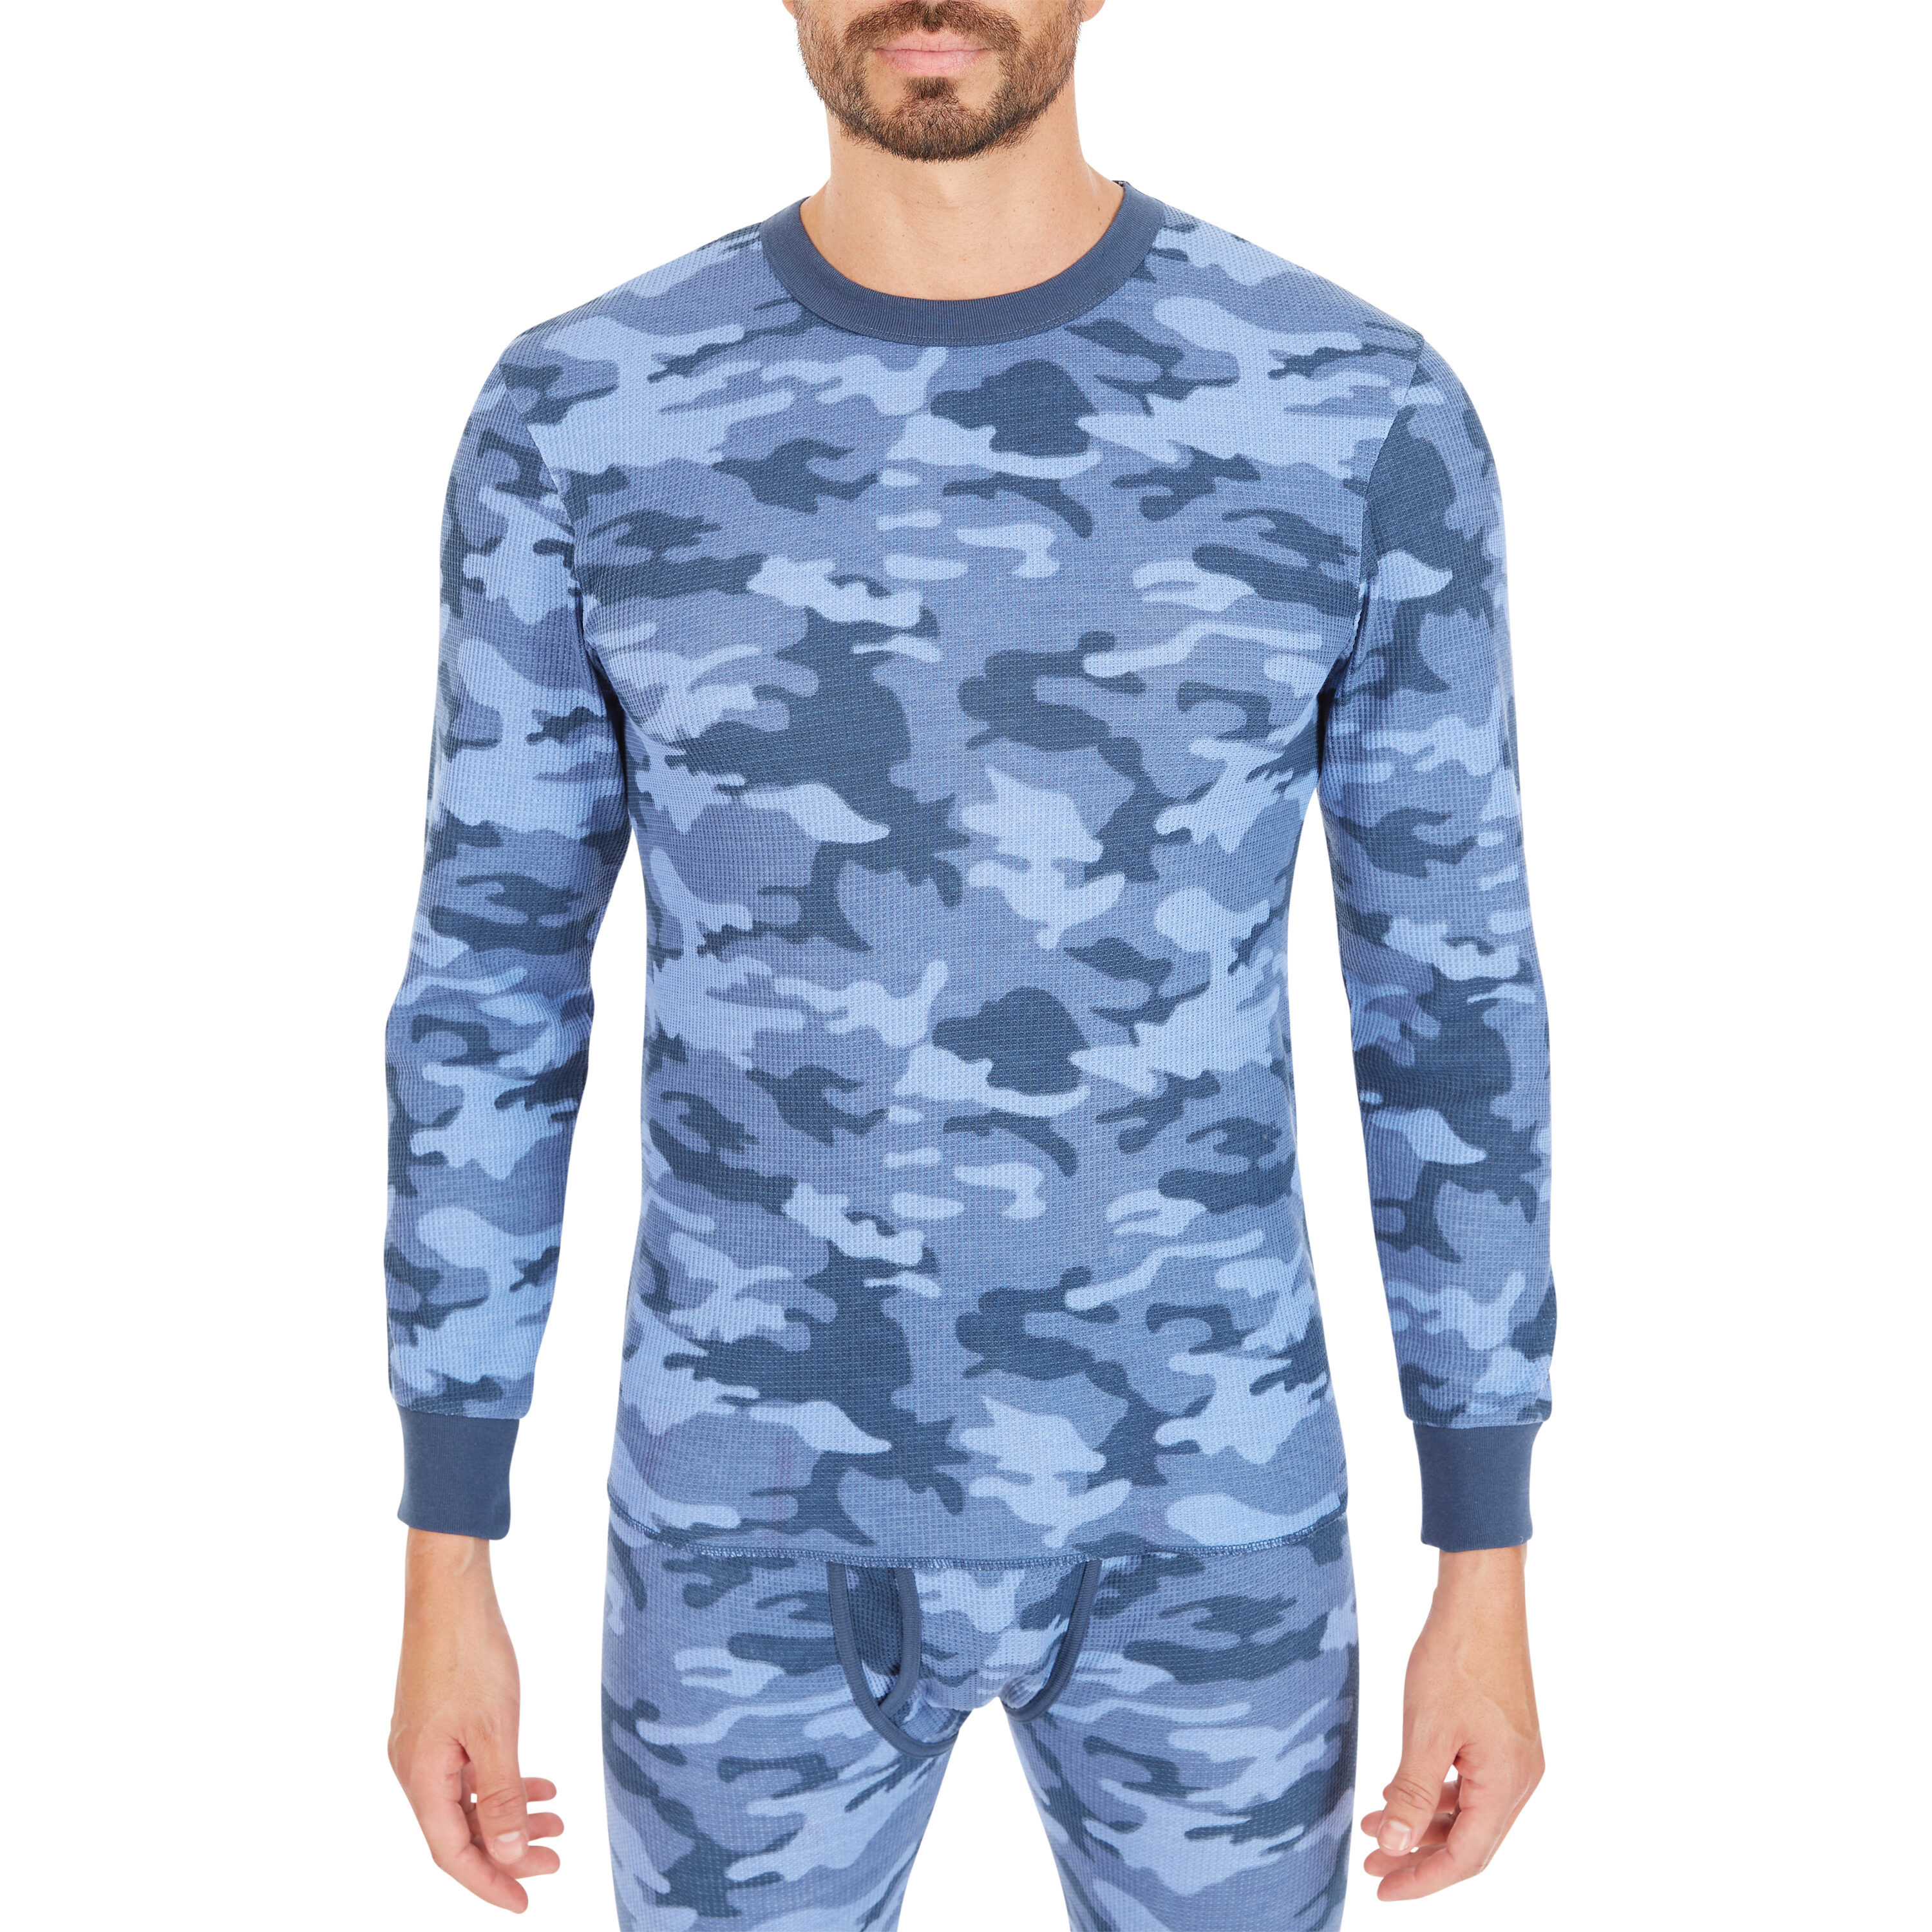 Smith's Workwear Denim Camo-199g Cotton/Polyester Thermal Base